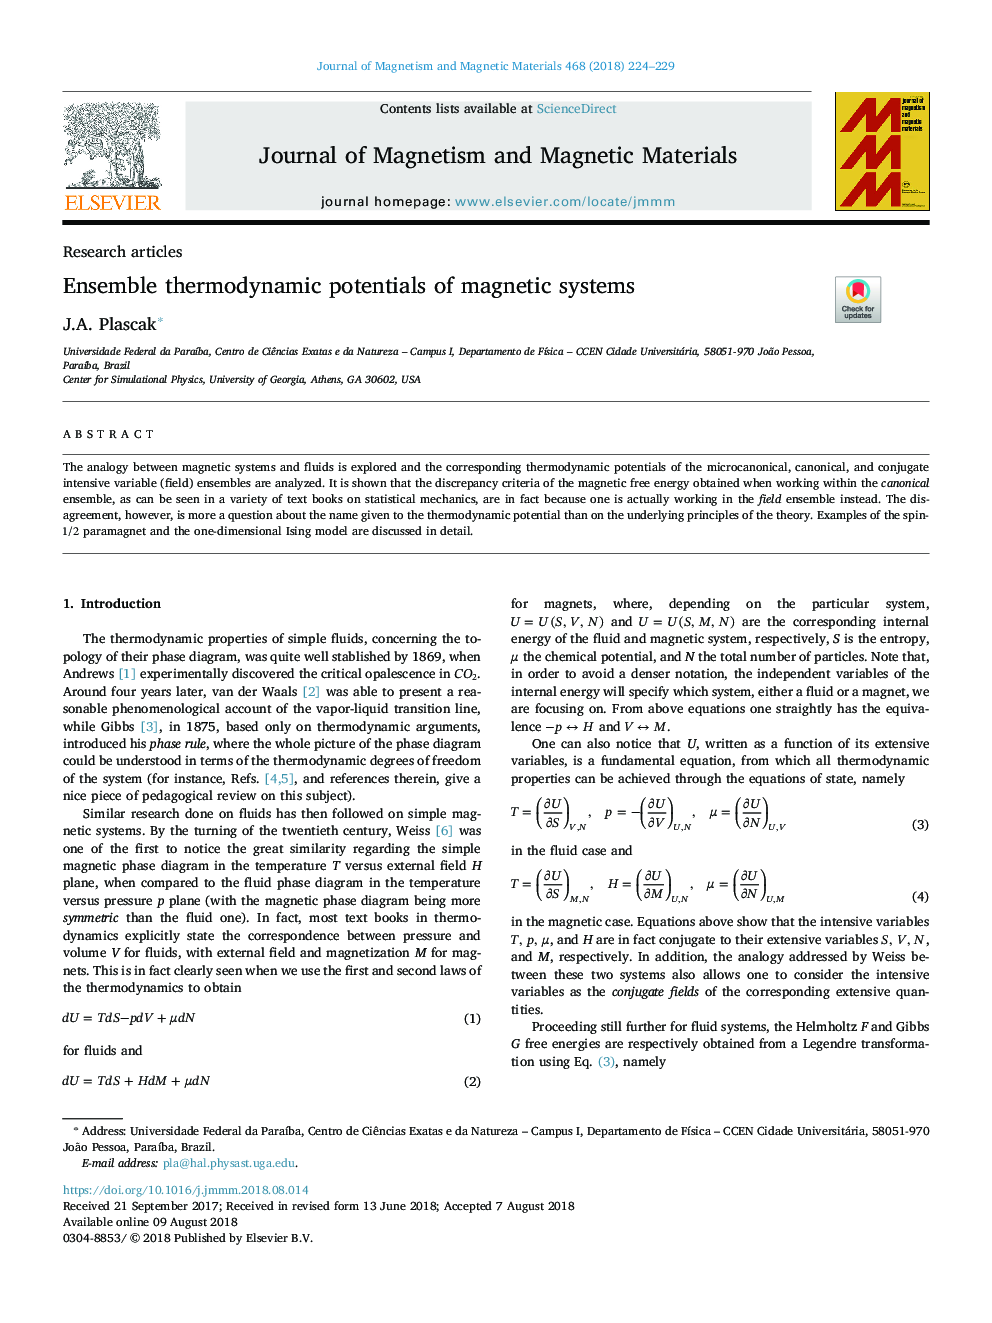 Ensemble thermodynamic potentials of magnetic systems